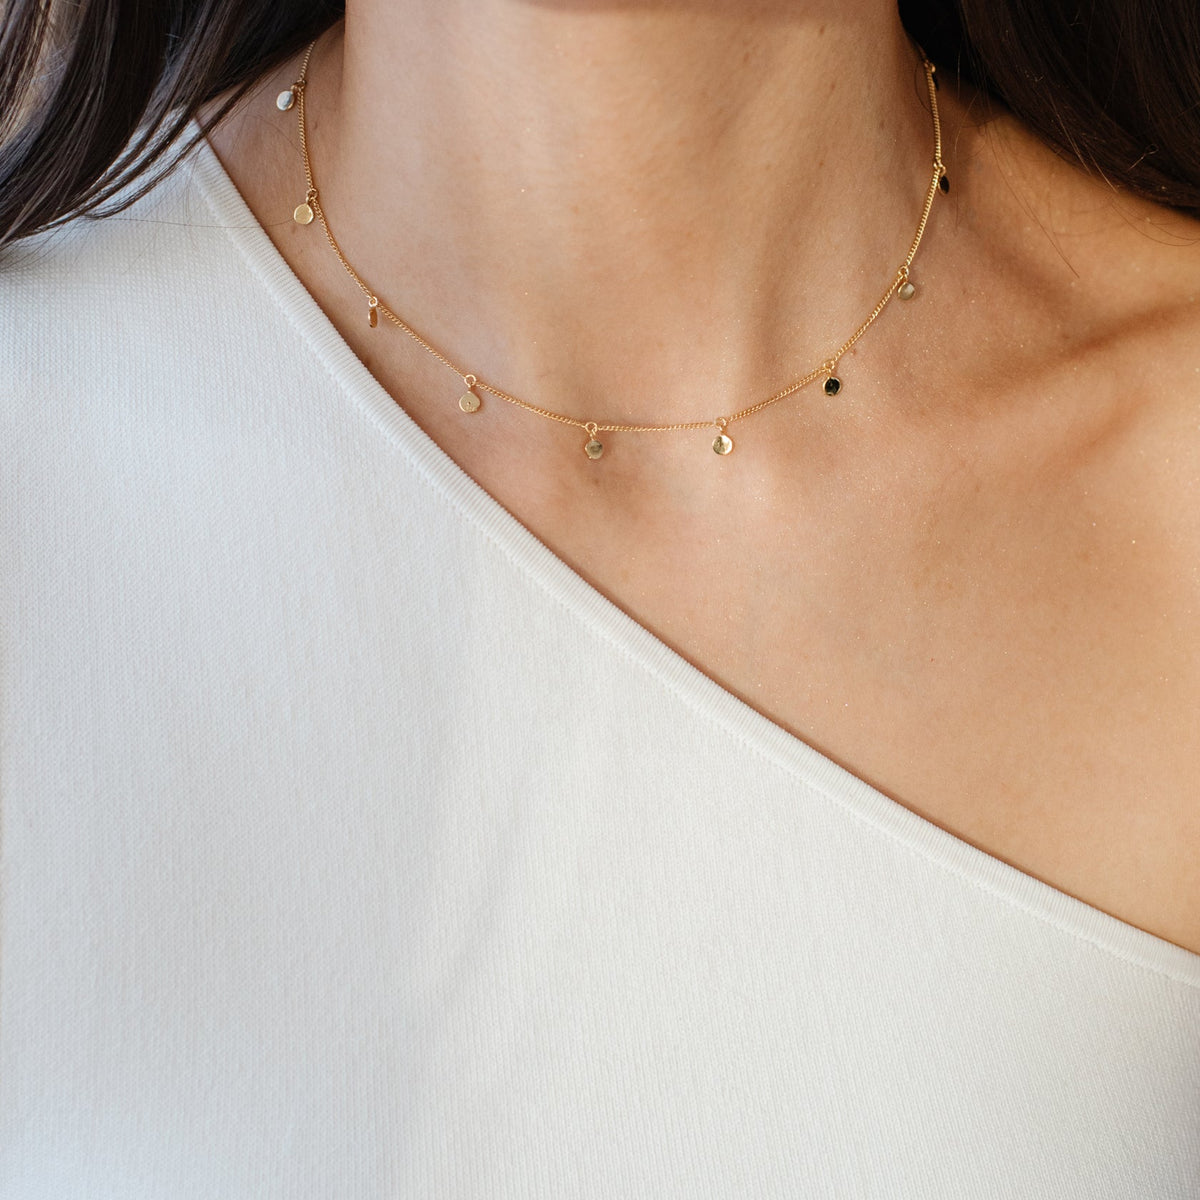 14K SOLID GOLD - DAINTY POISE DISK NECKLACE - SO PRETTY CARA COTTER